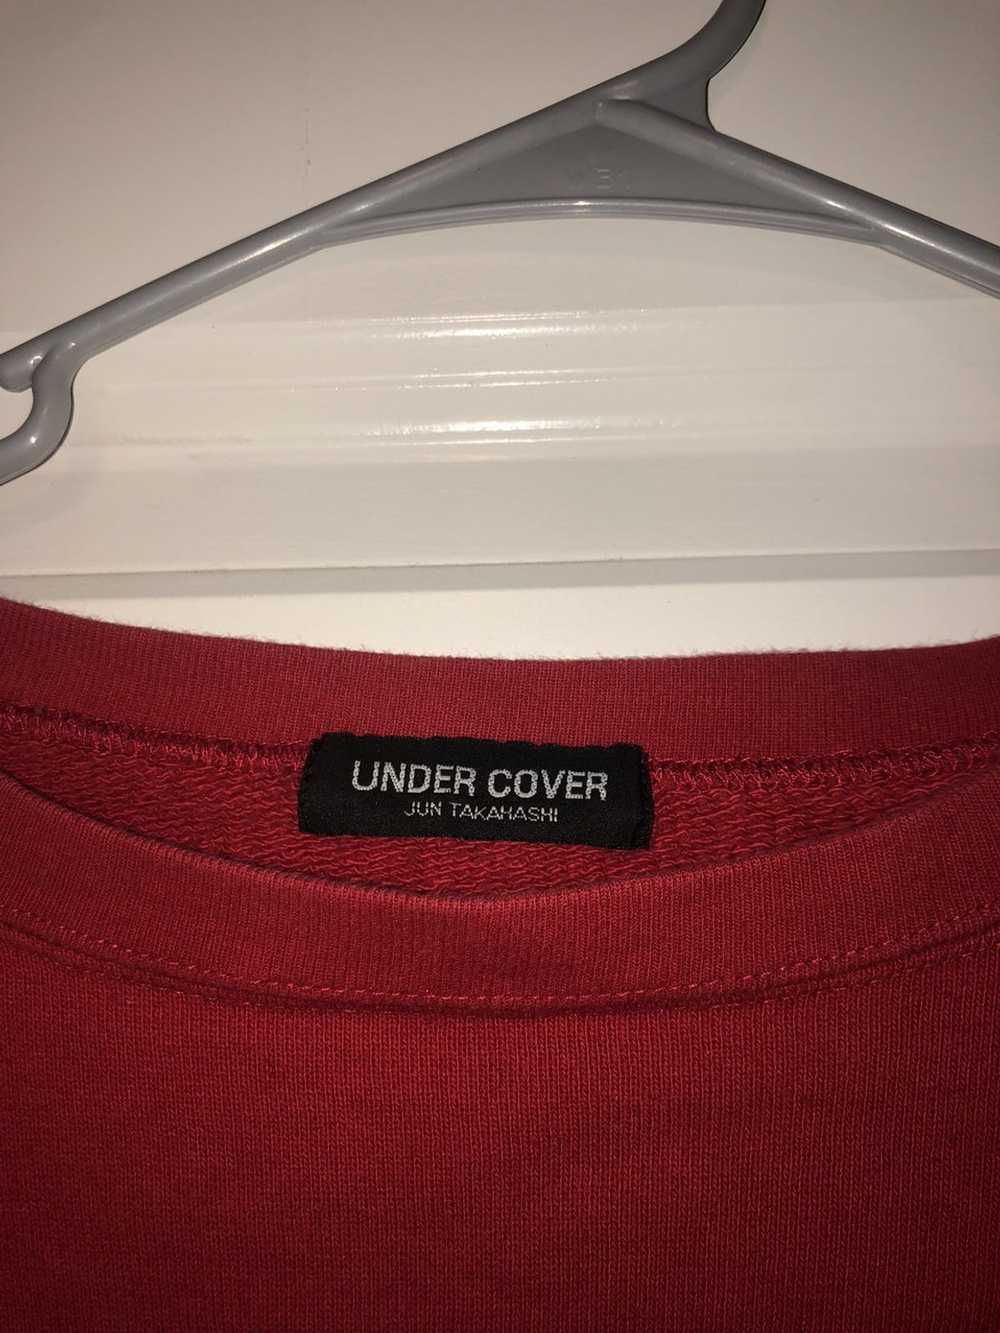 Undercover Undercover Mad For Rebels Sweatshirt - image 4